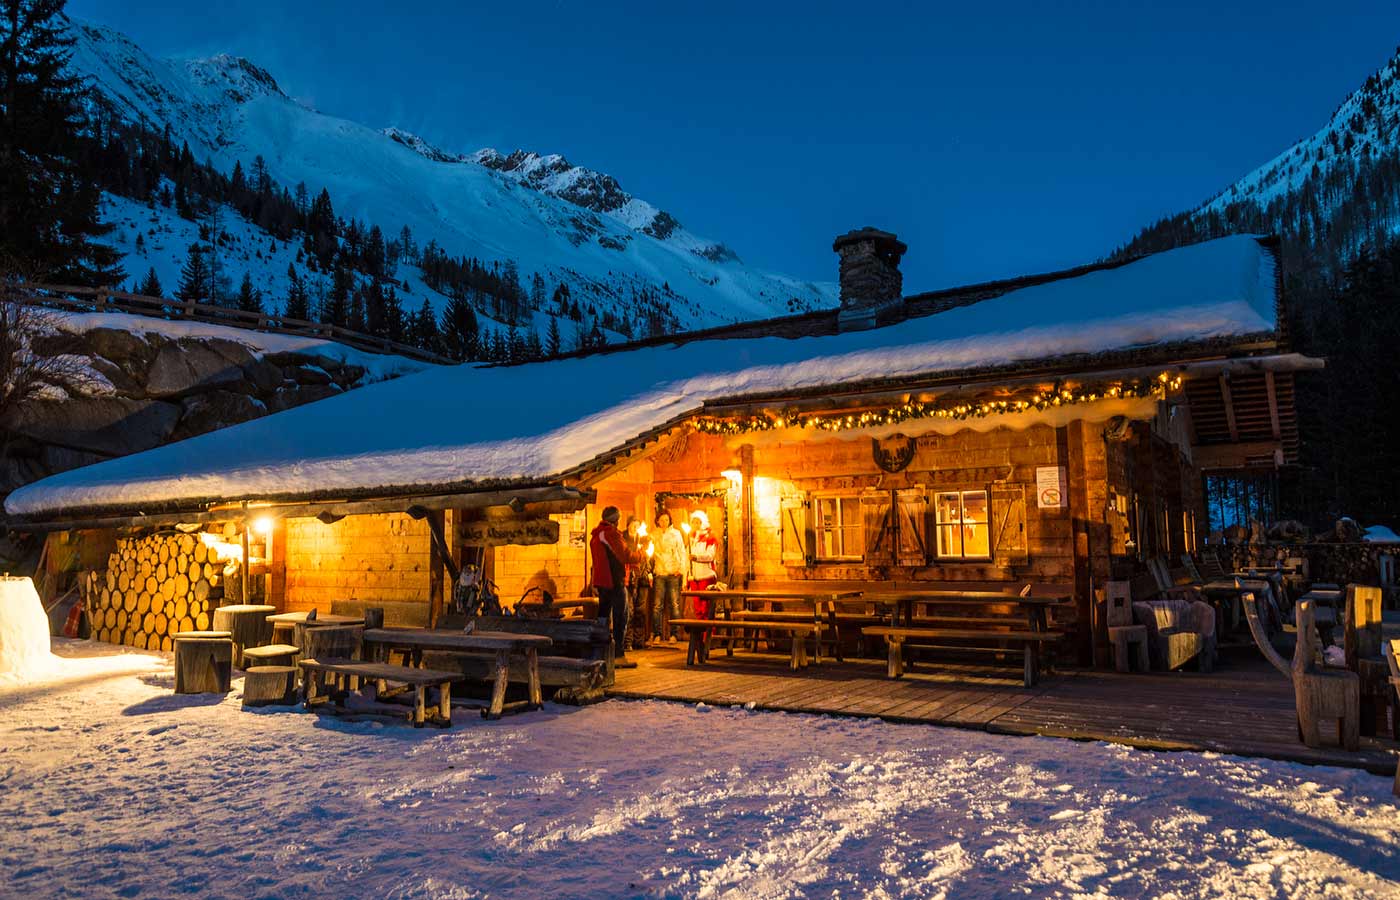 View of a wooden alpine hut illuminated at night with snow on the roof and three people speaking out of the door